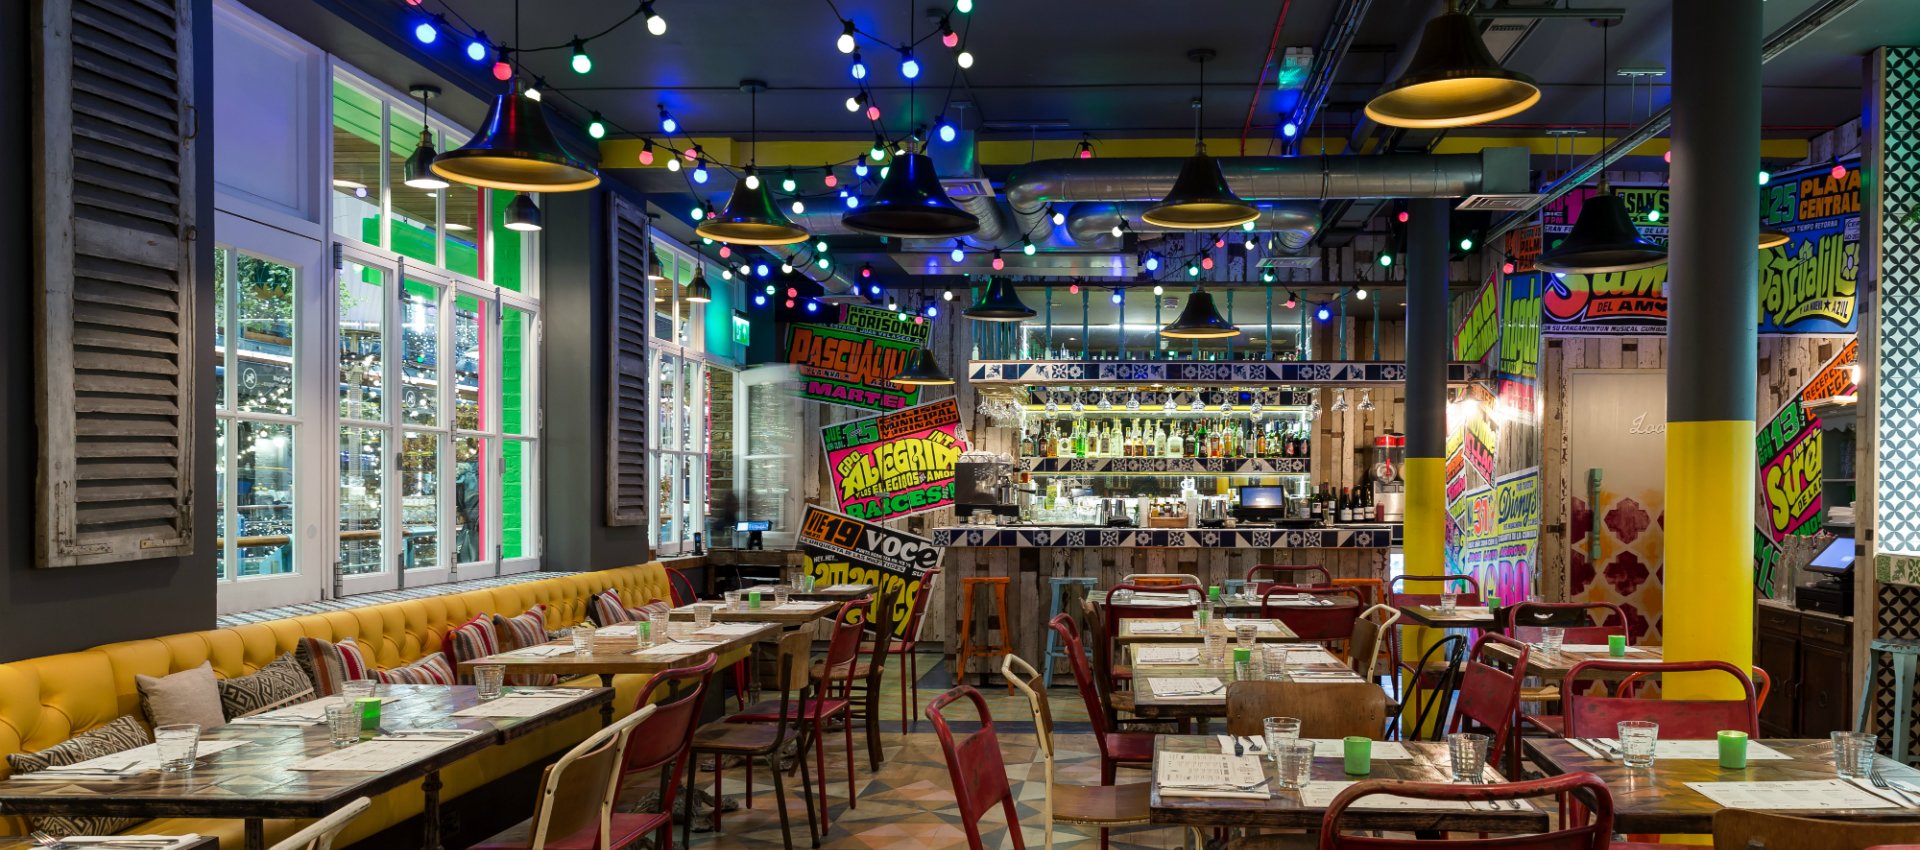 Your Kingly Court Guide - All The Best Places To Eat In Carnaby's Food Hub